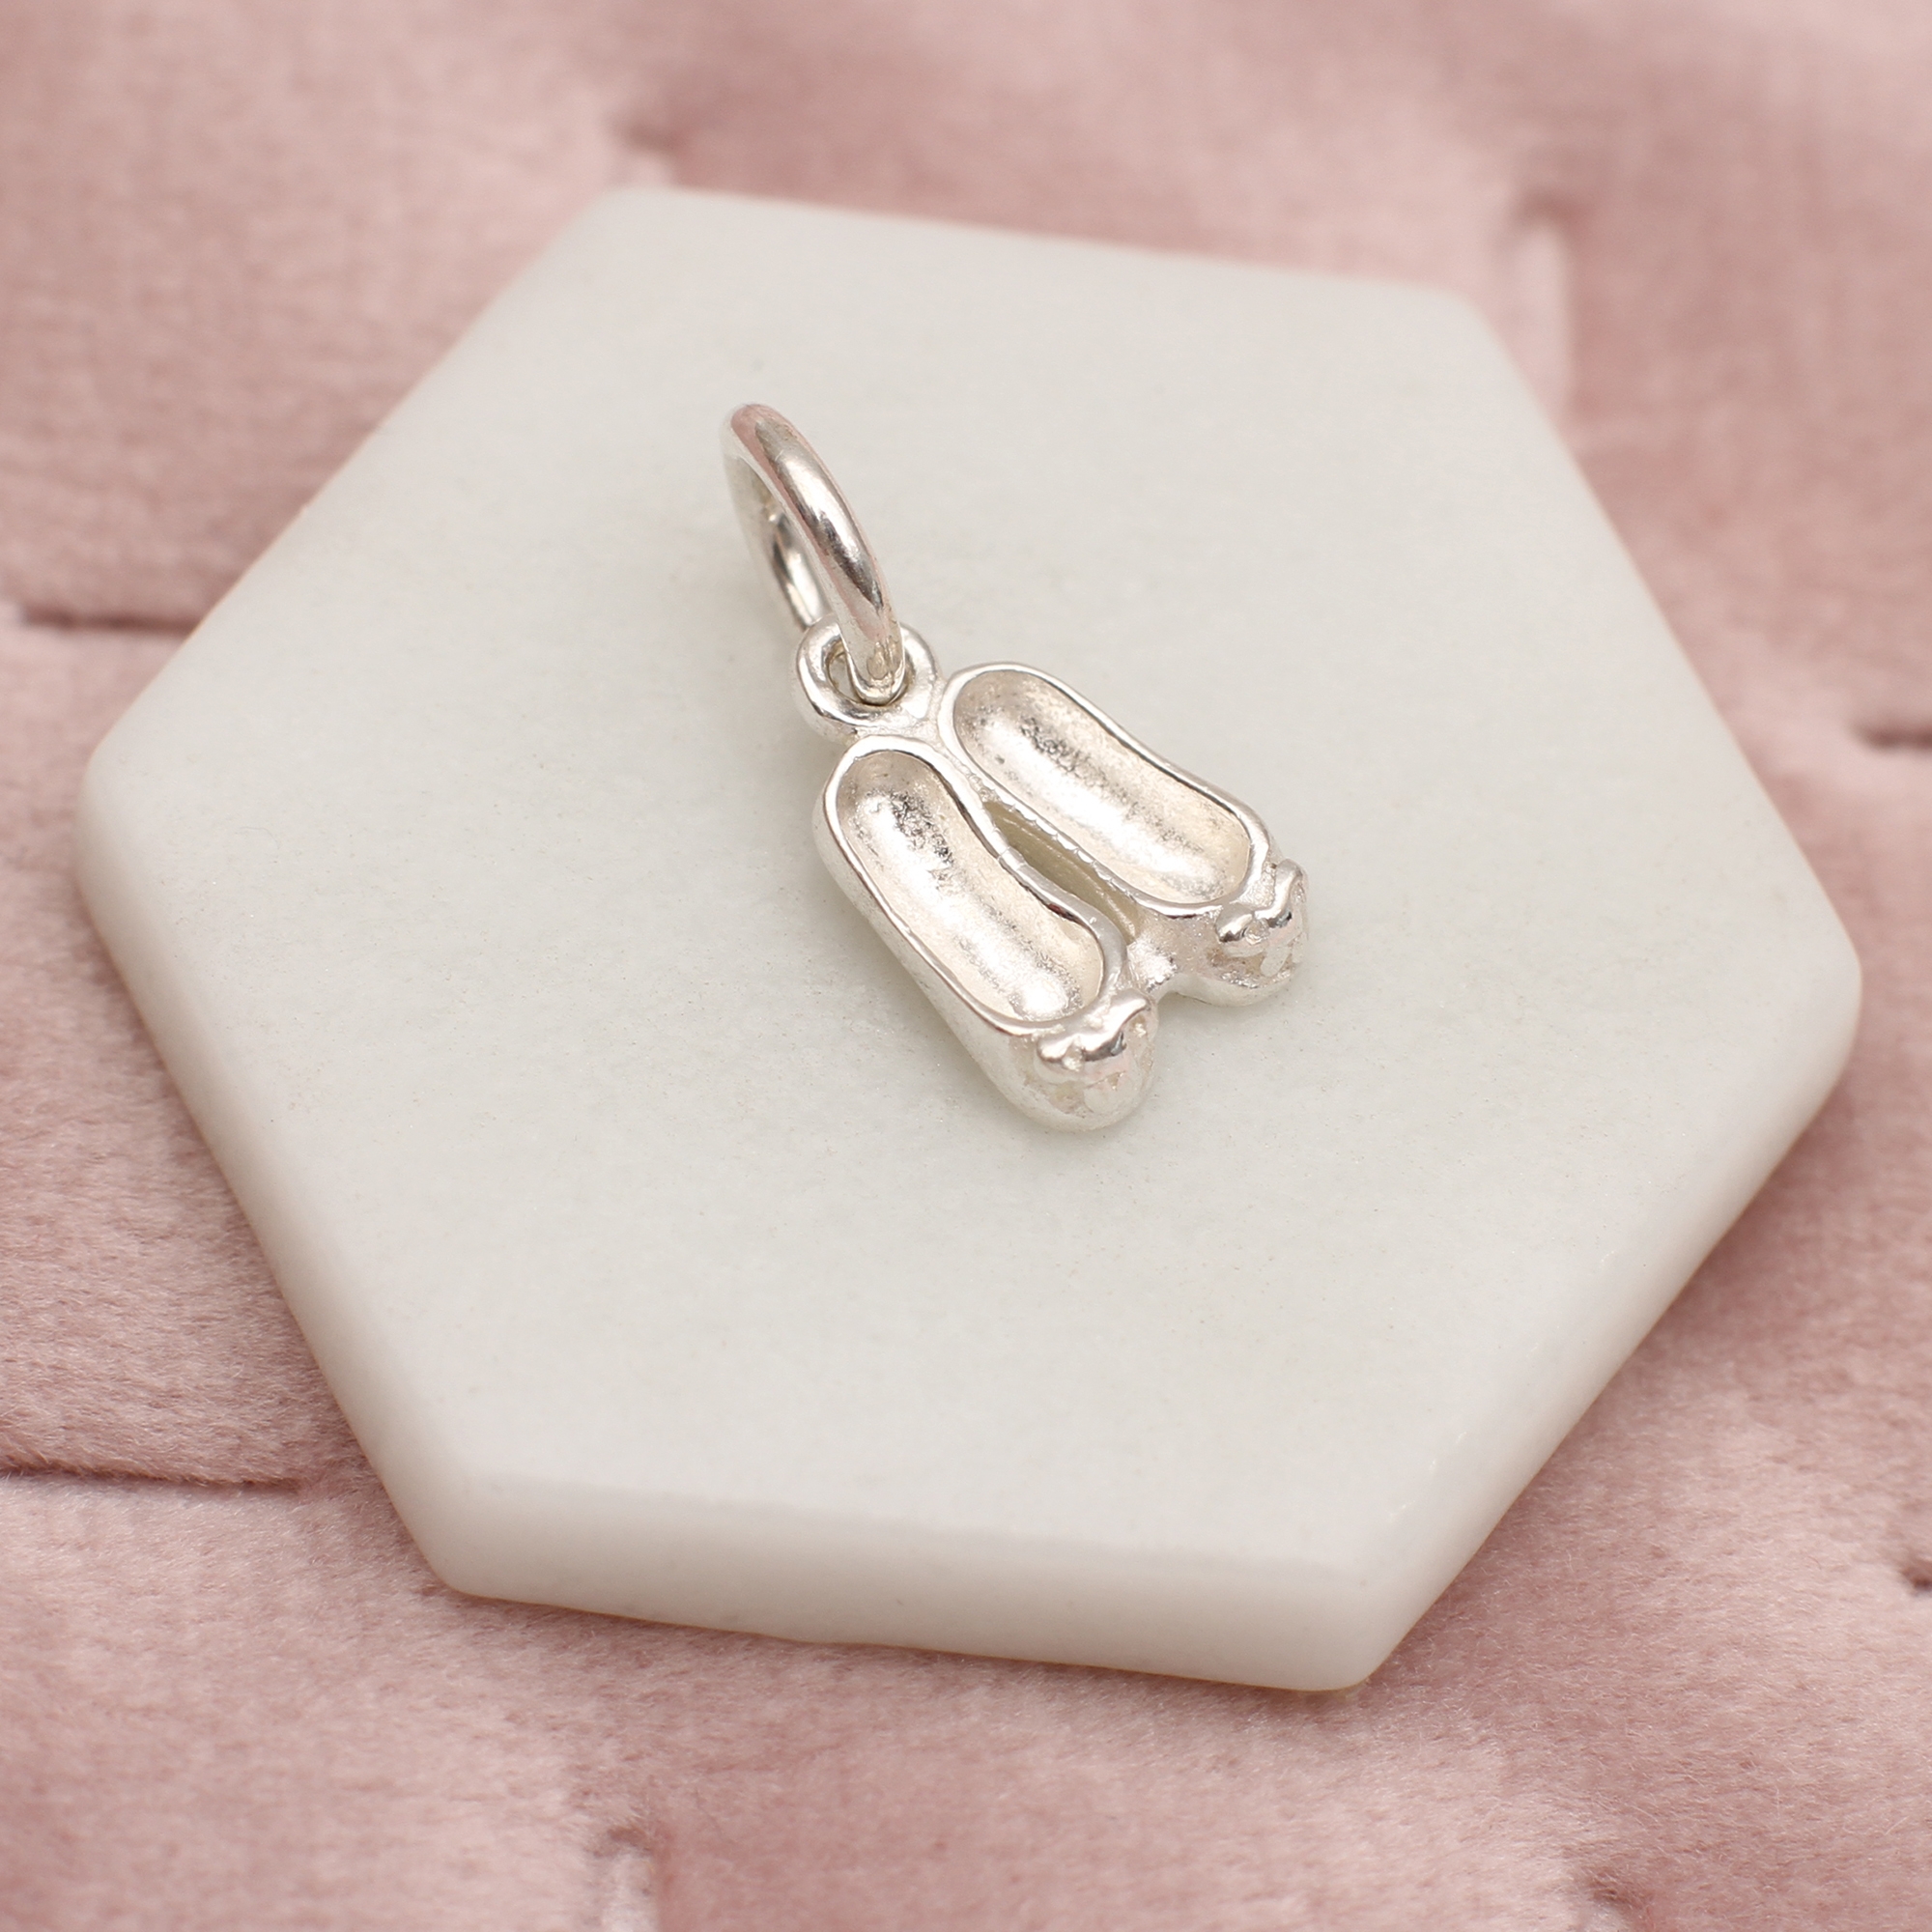 Sterling Silver Ballet Shoes Charm – Hurley Burley